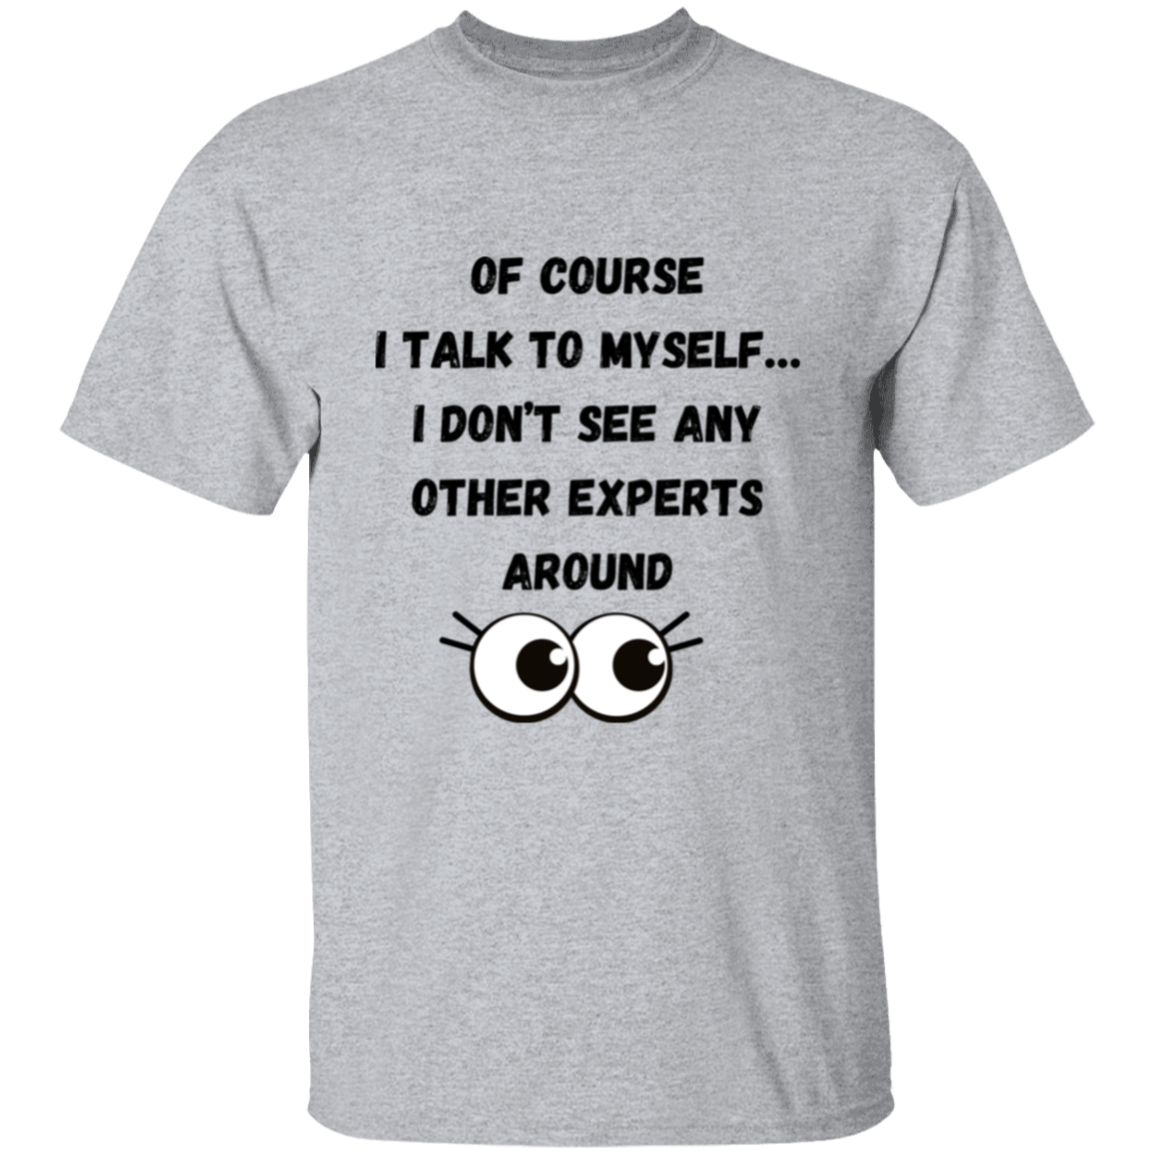 Of course I talk to myself… I don’t see any other experts around  T-Shirt